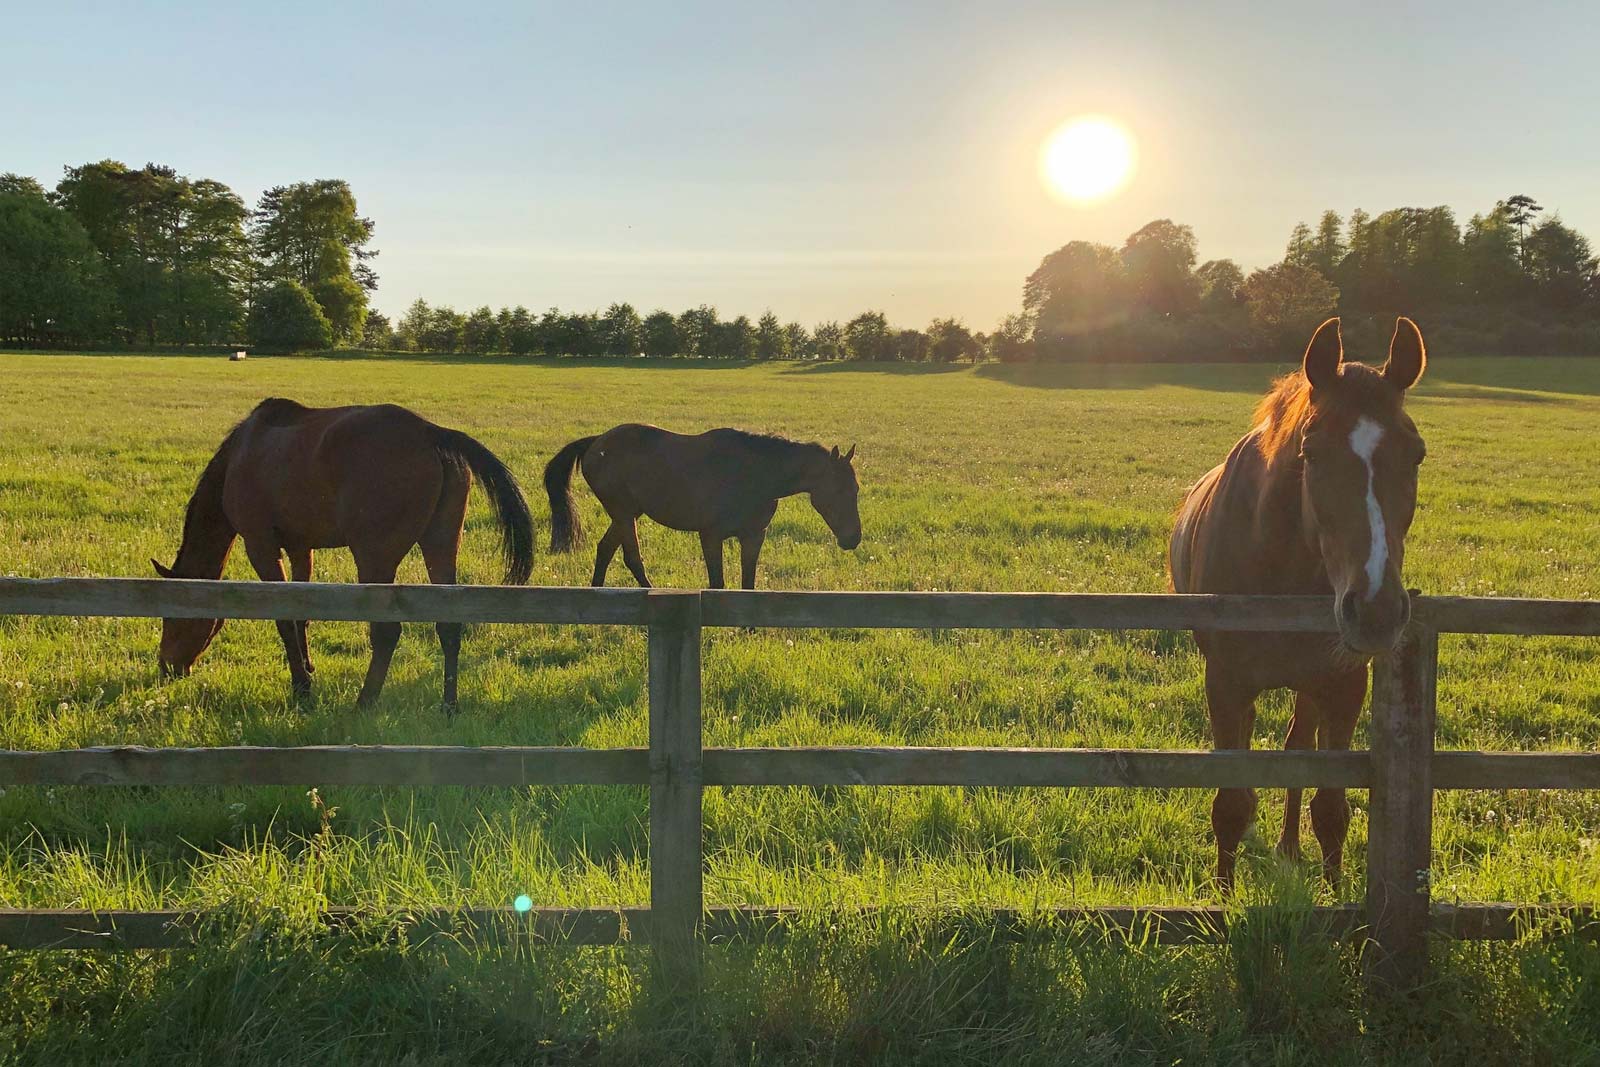 Horses in pasture at sunset.